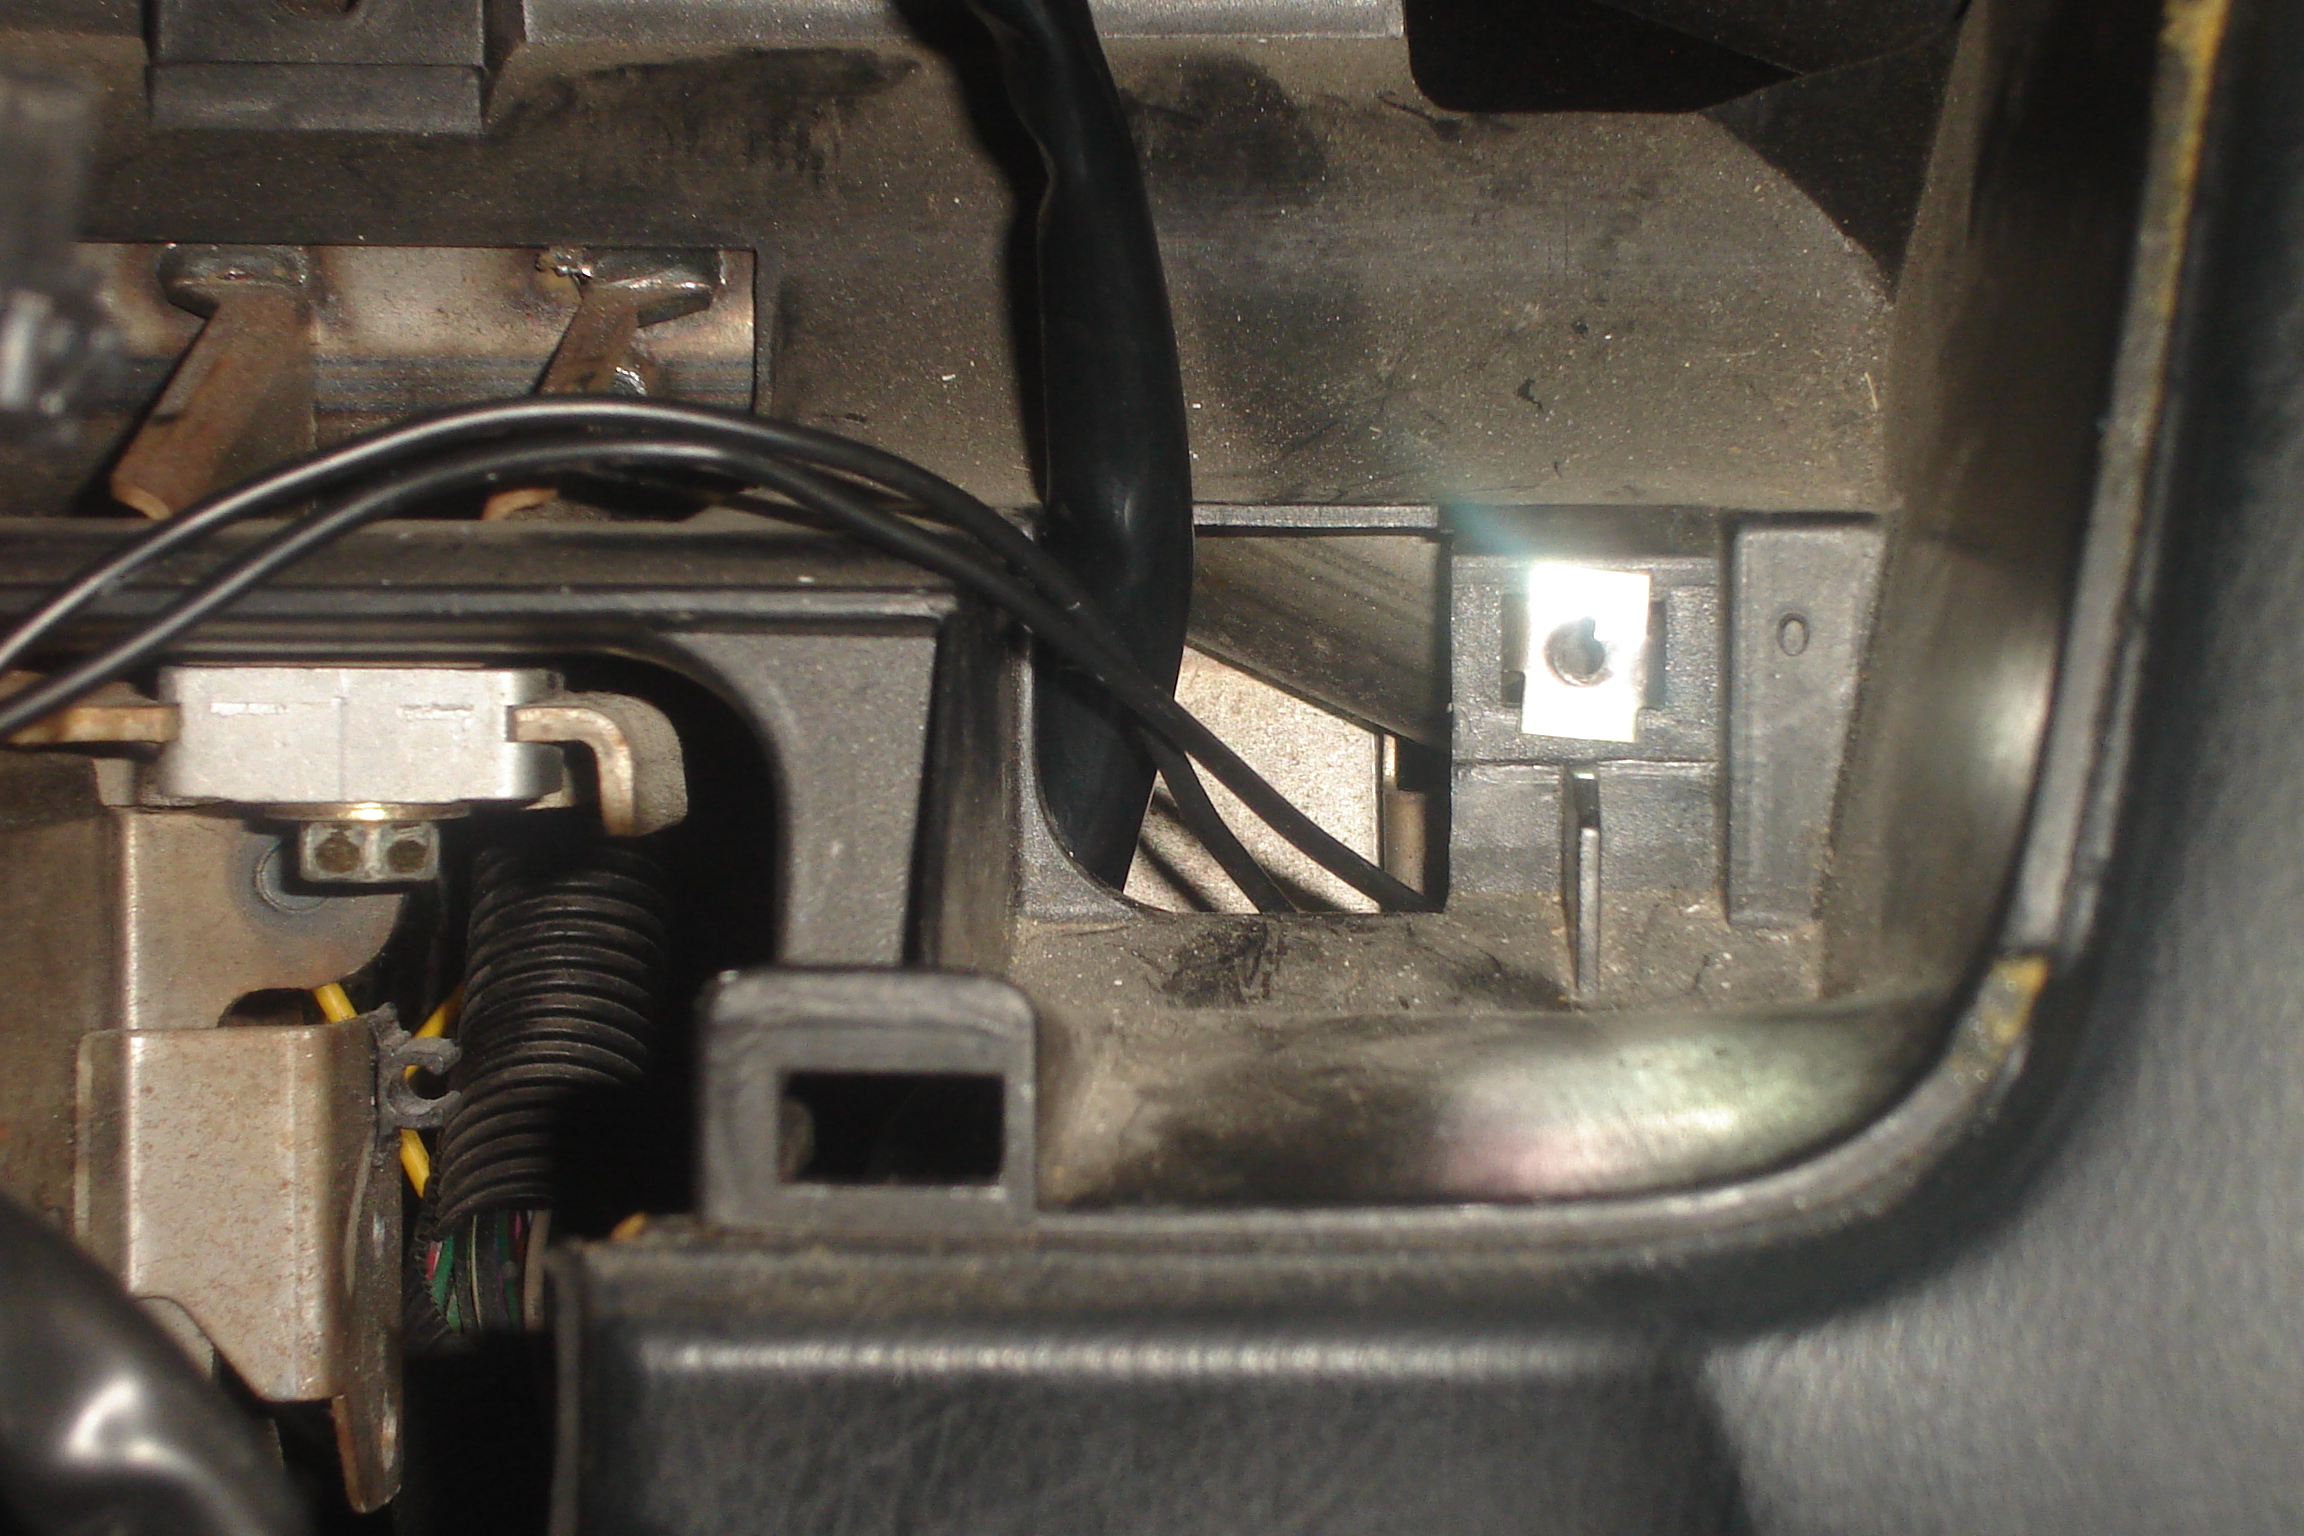 Routing the Turbo Timer harness through the dash